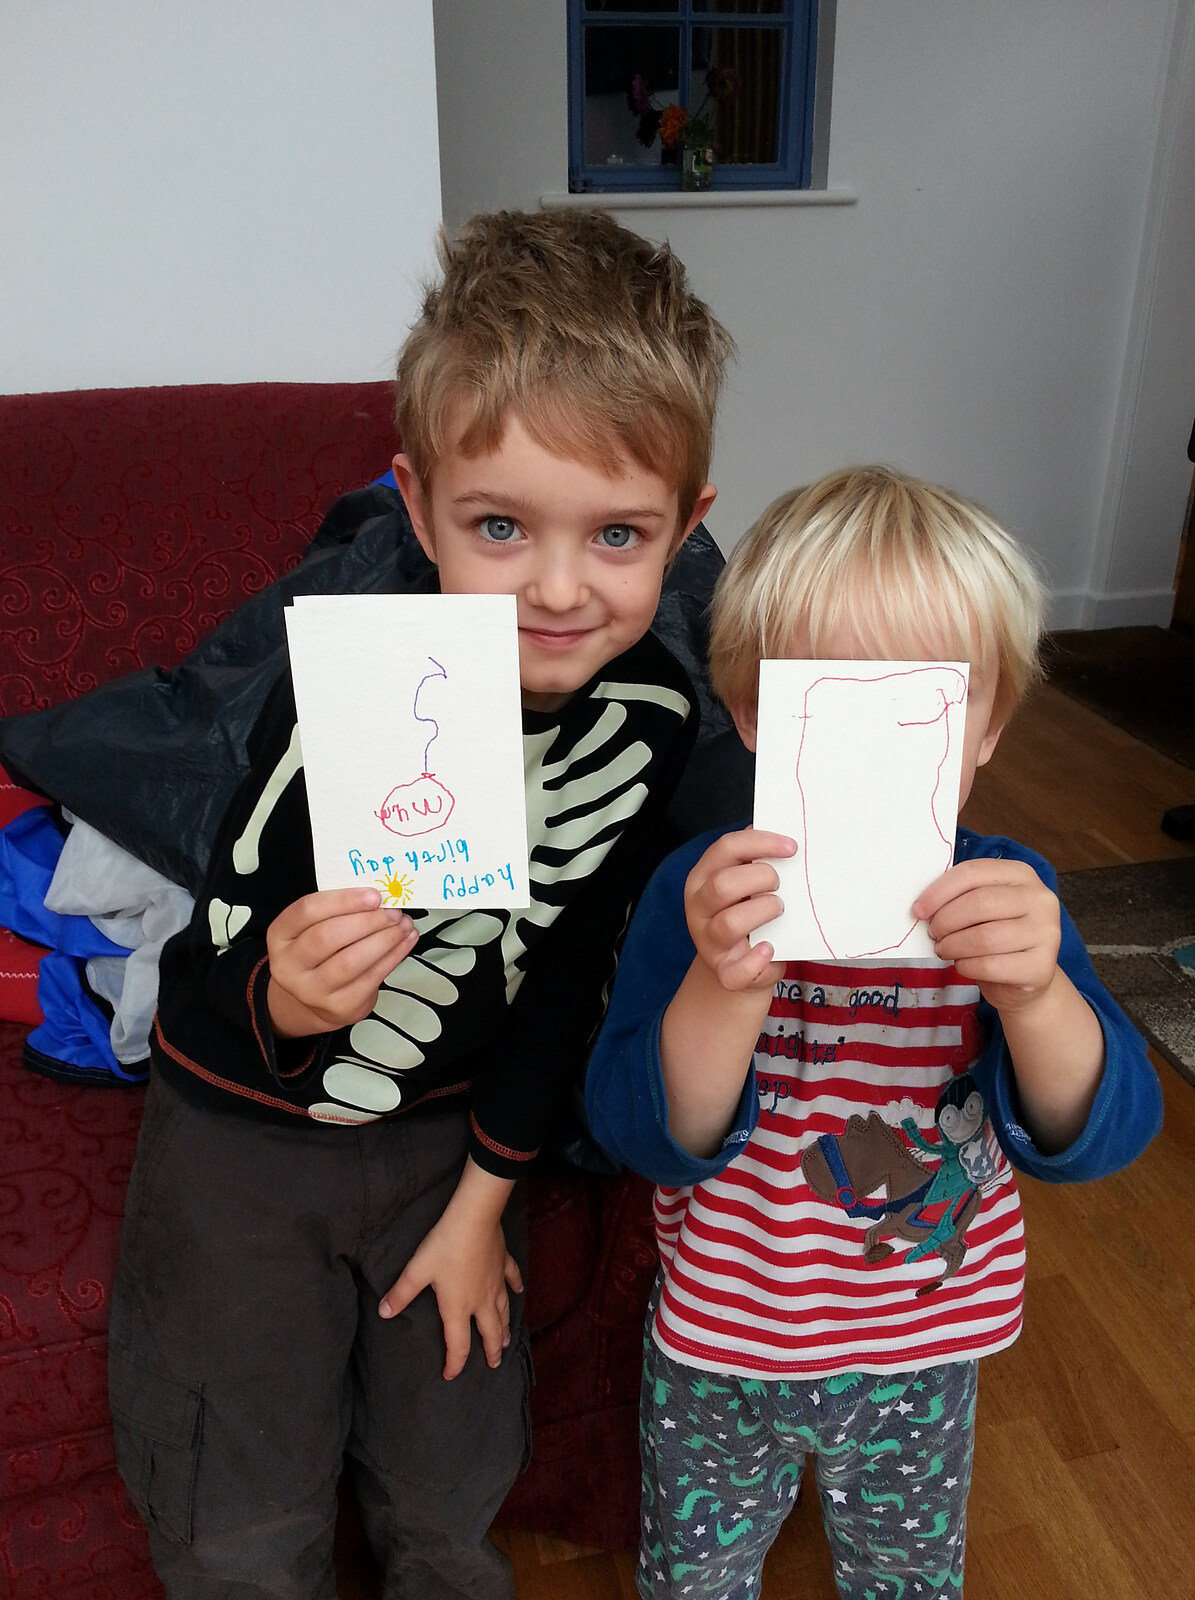 The boys make birthday cards for Isobel from Cameraphone Randomness and a Thornham Walk, Suffolk - 14th December 2014